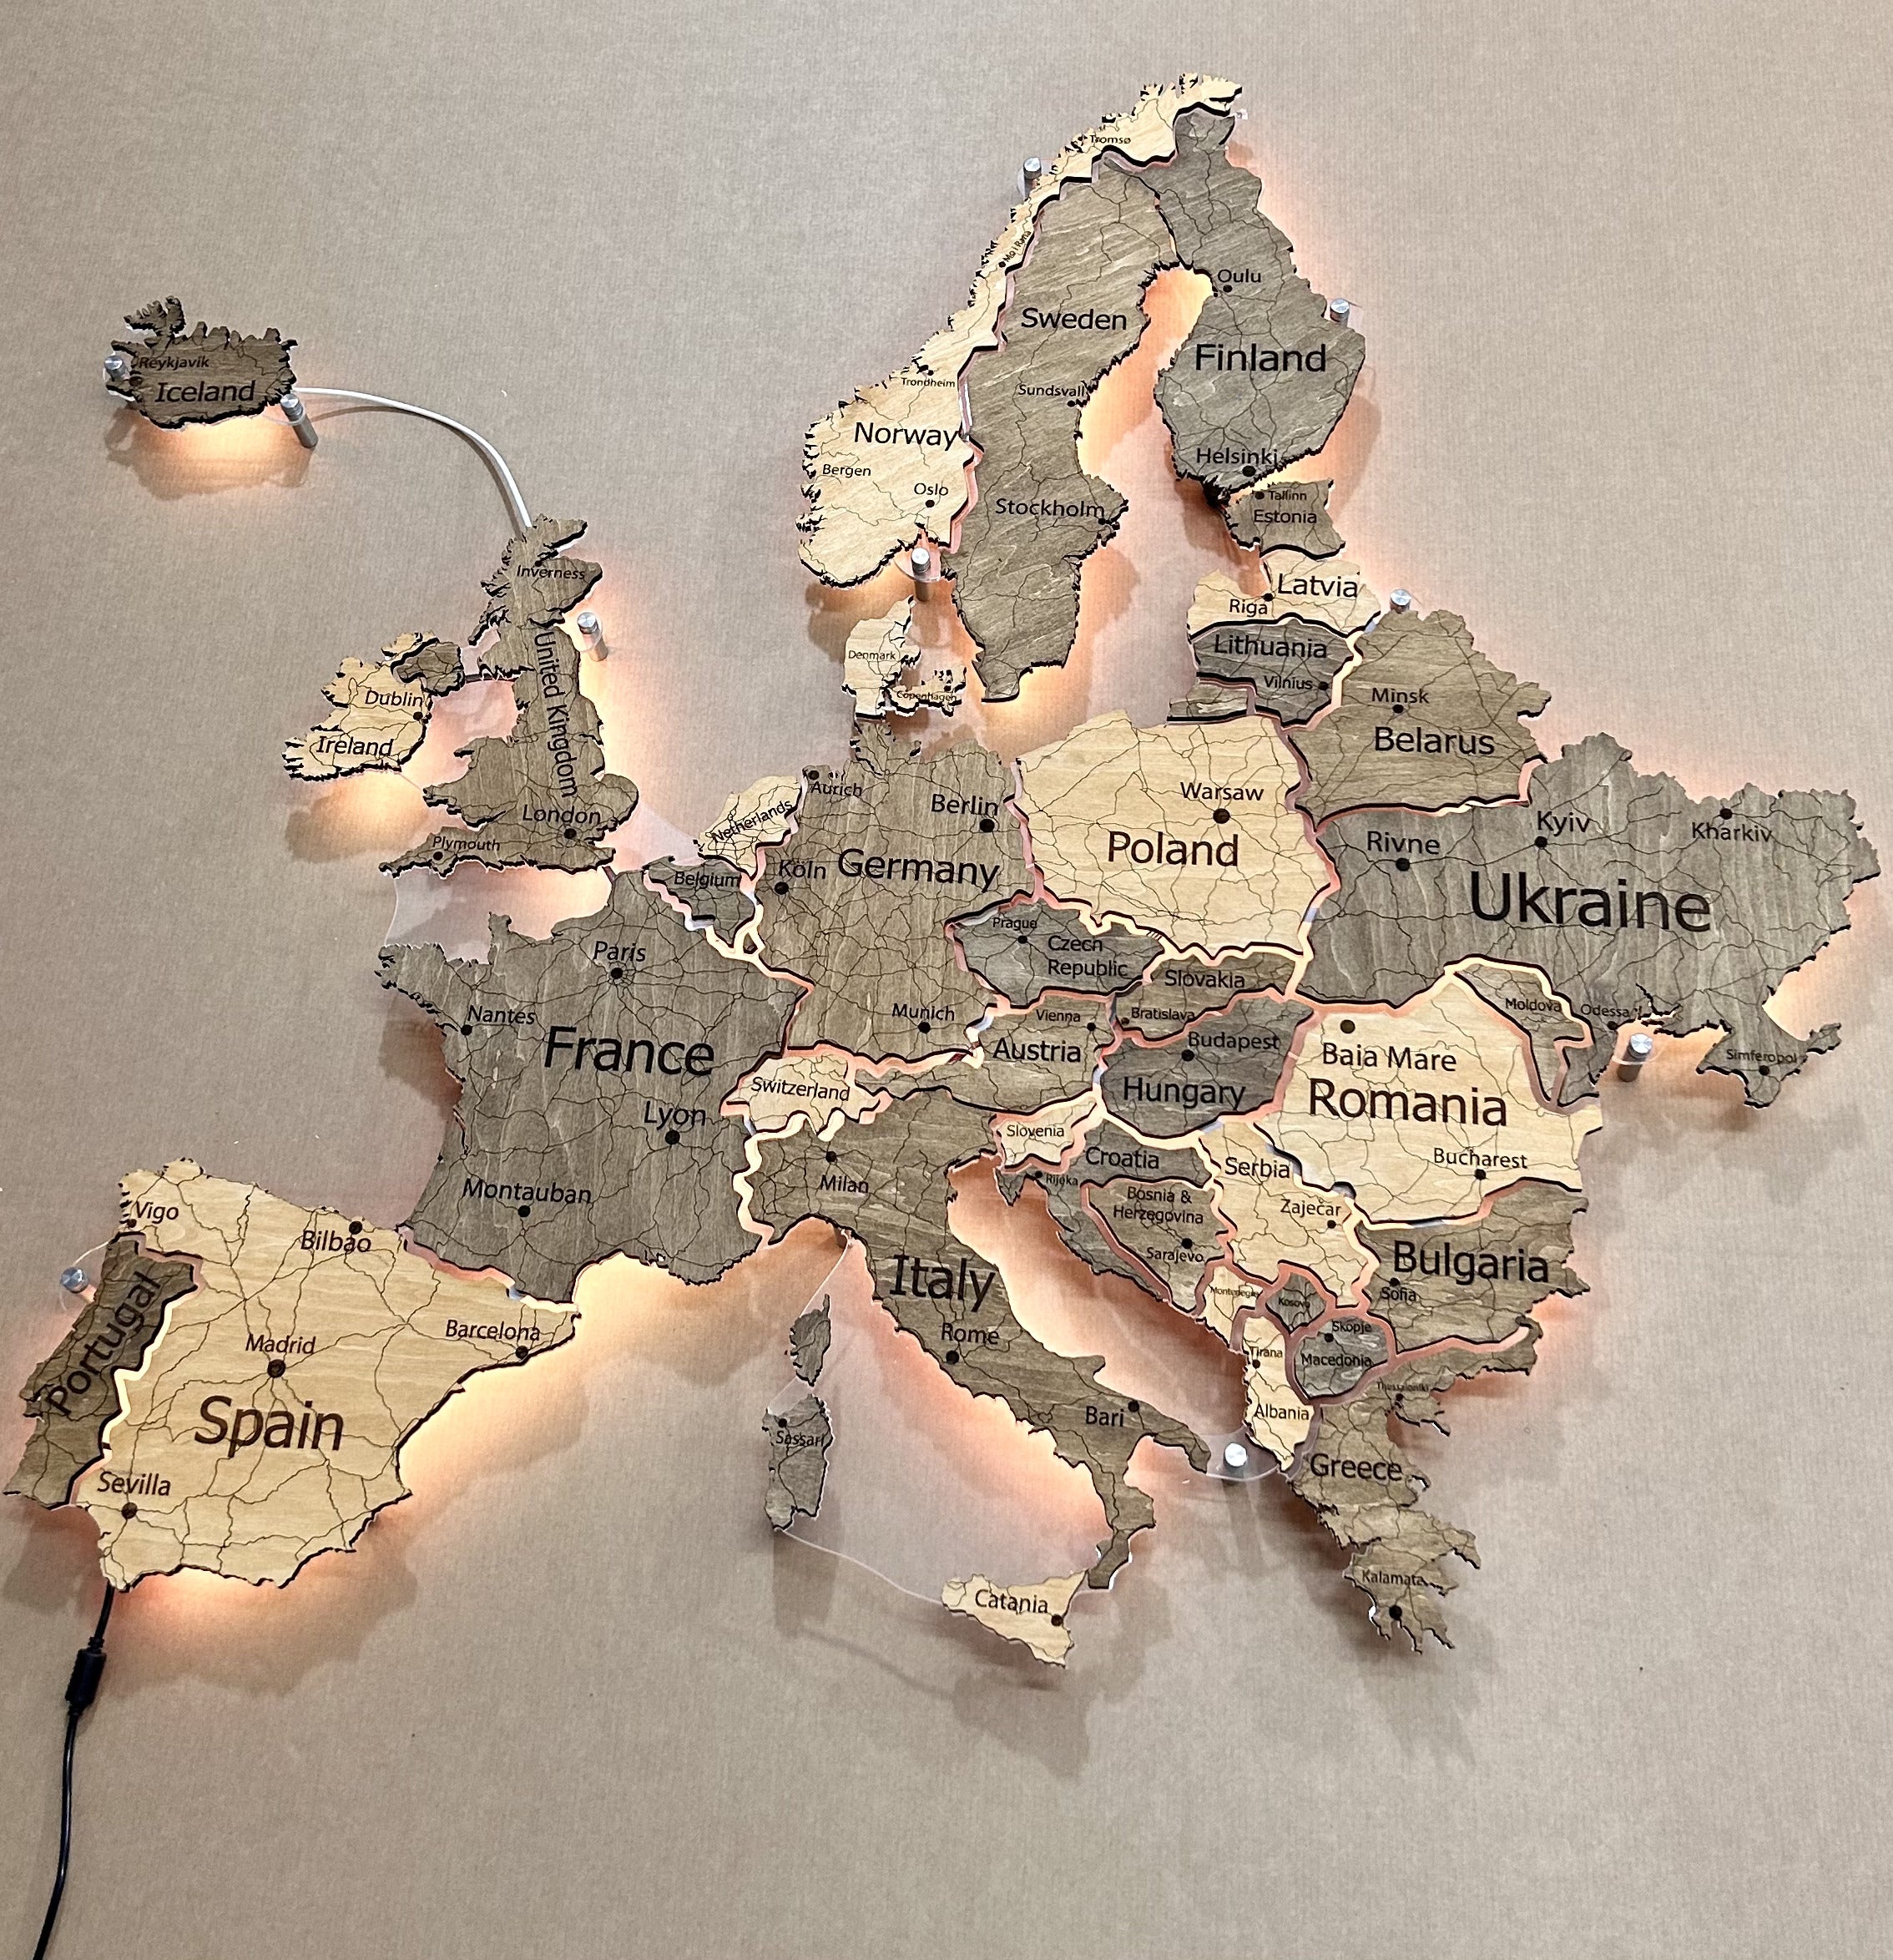 europe-led-map-on-acrylic-glass-with-backlighting-between-countries-color-nobel